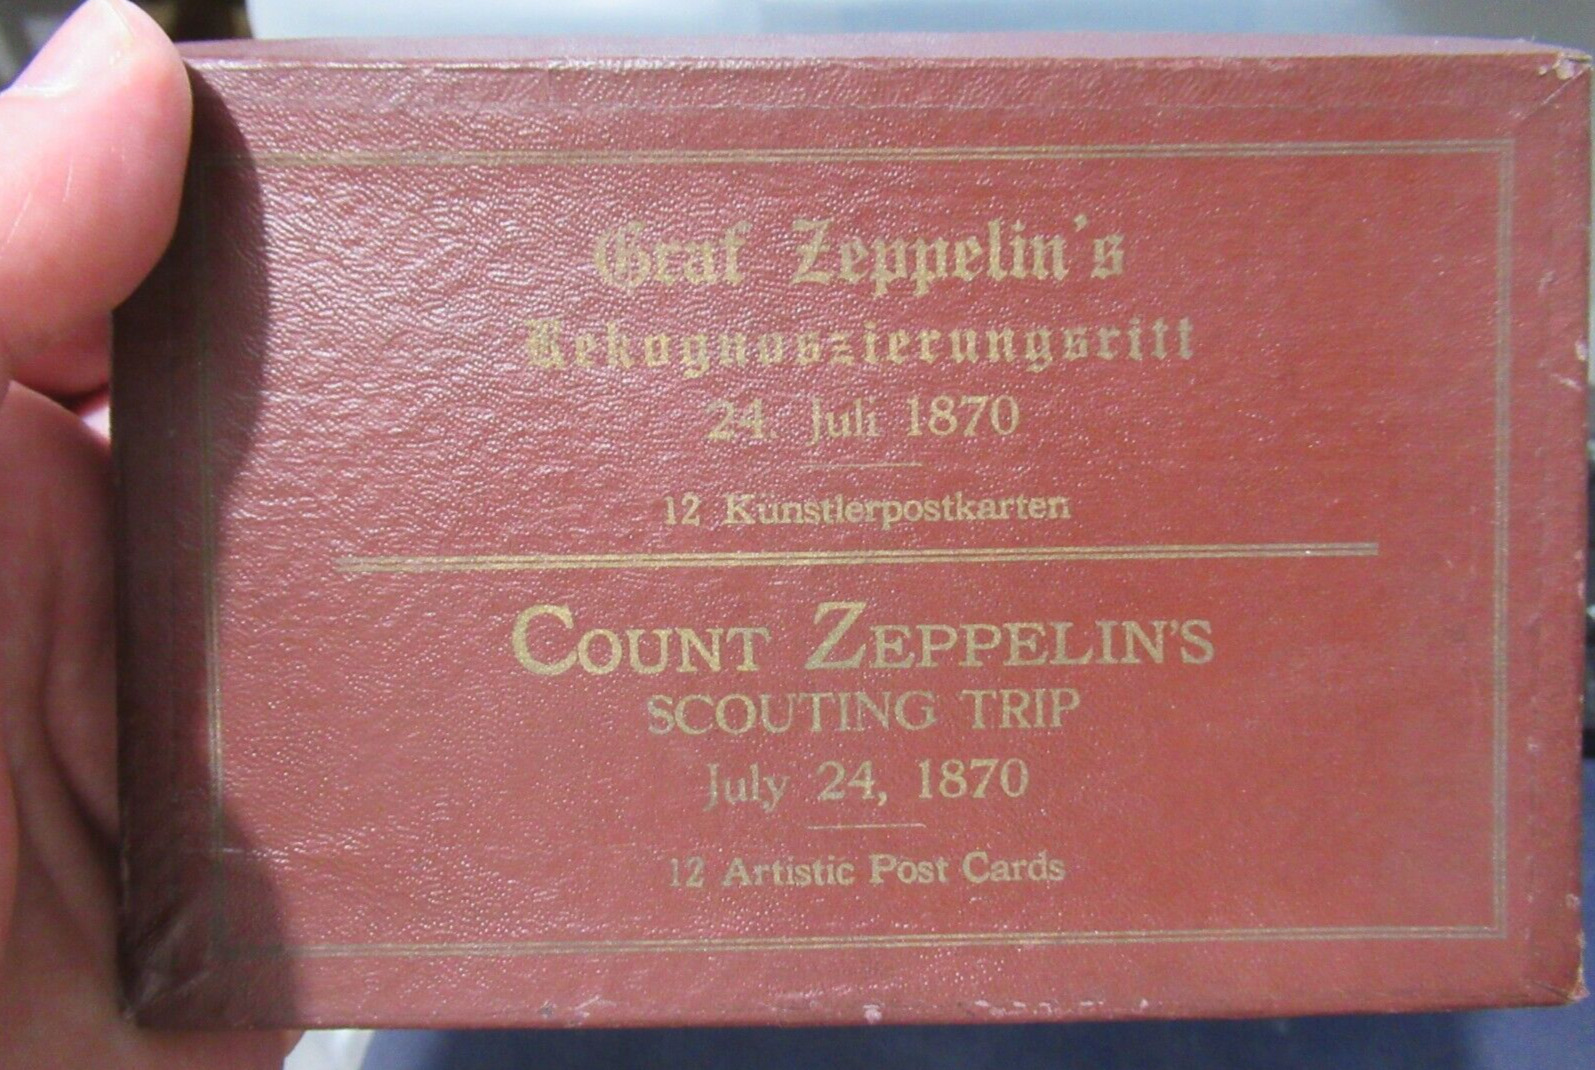 RARE: 1915 Set of 12 Artistic Postcards, Graf Zeppelin's Scouting Trip in 1870